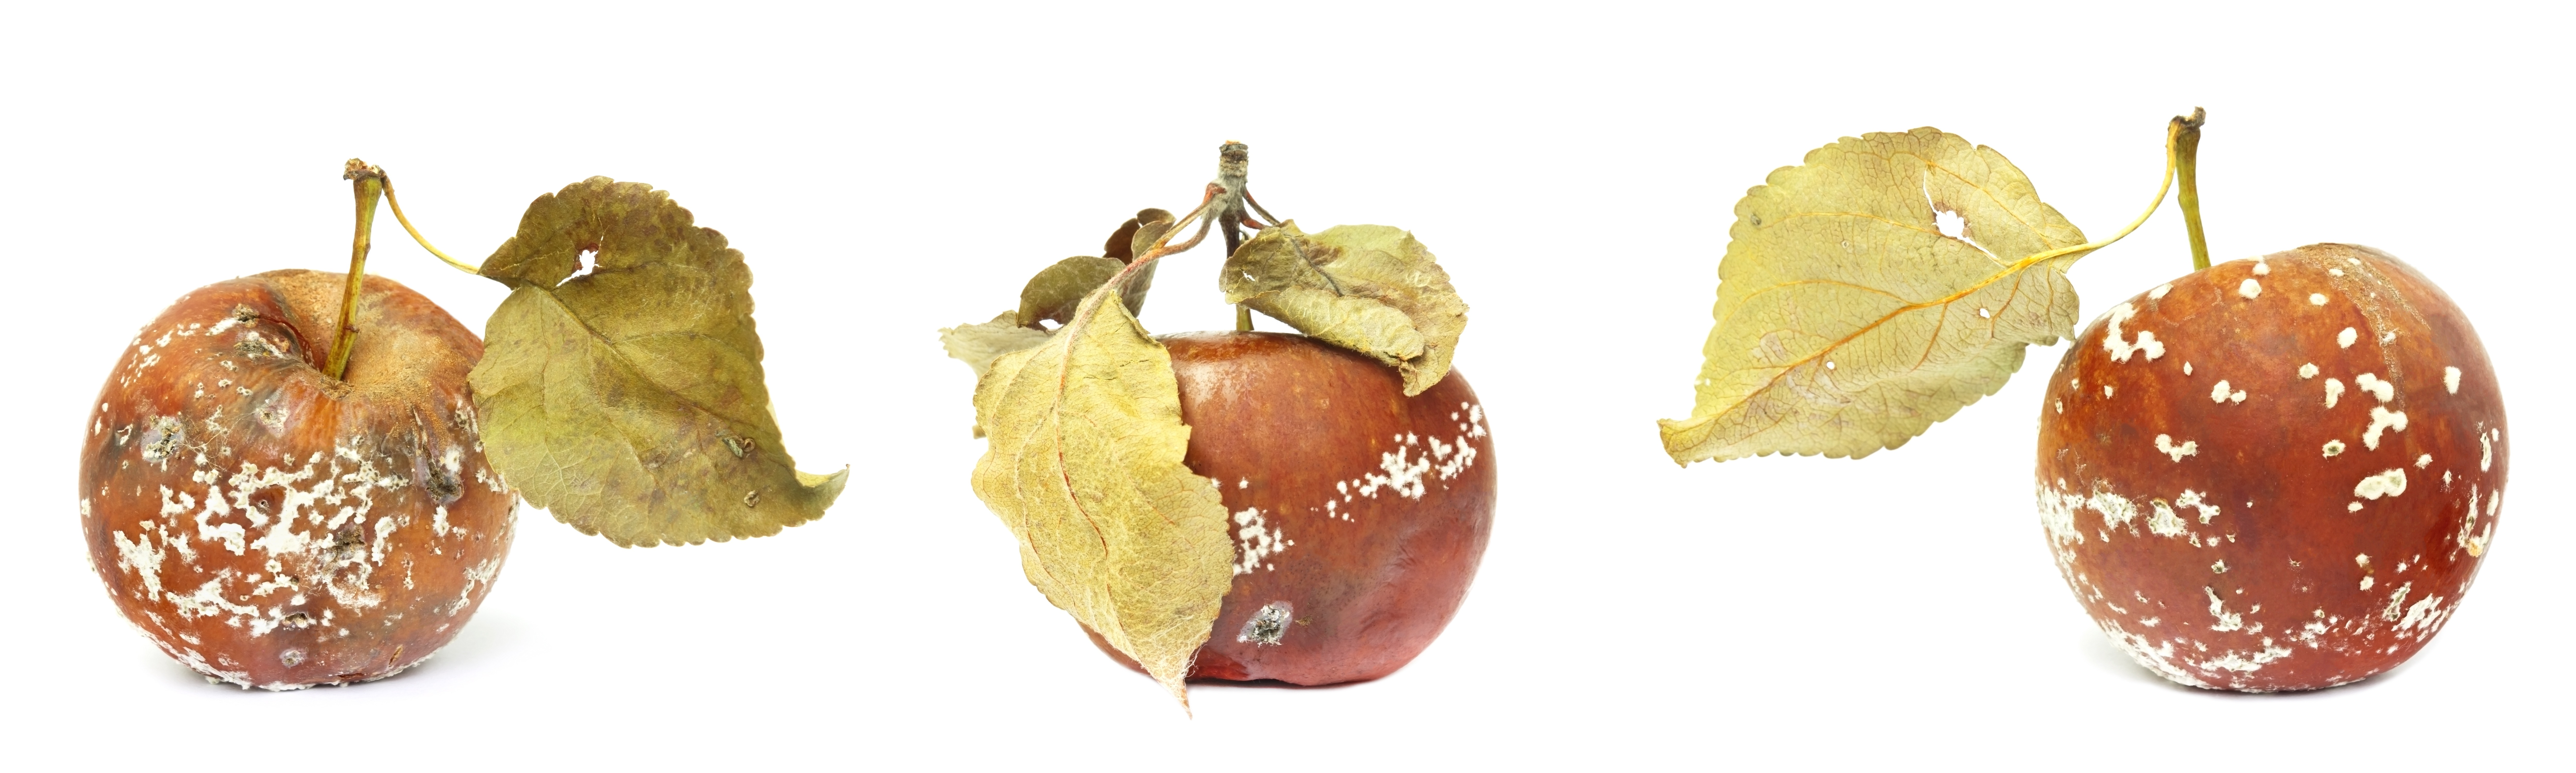 Set of mold growing on the old apple. Isolated on white background photo. Food contamination, bad spoiled disgusting rotten organic apple. Messthetics concept, food leftovers. Three rotten apples.